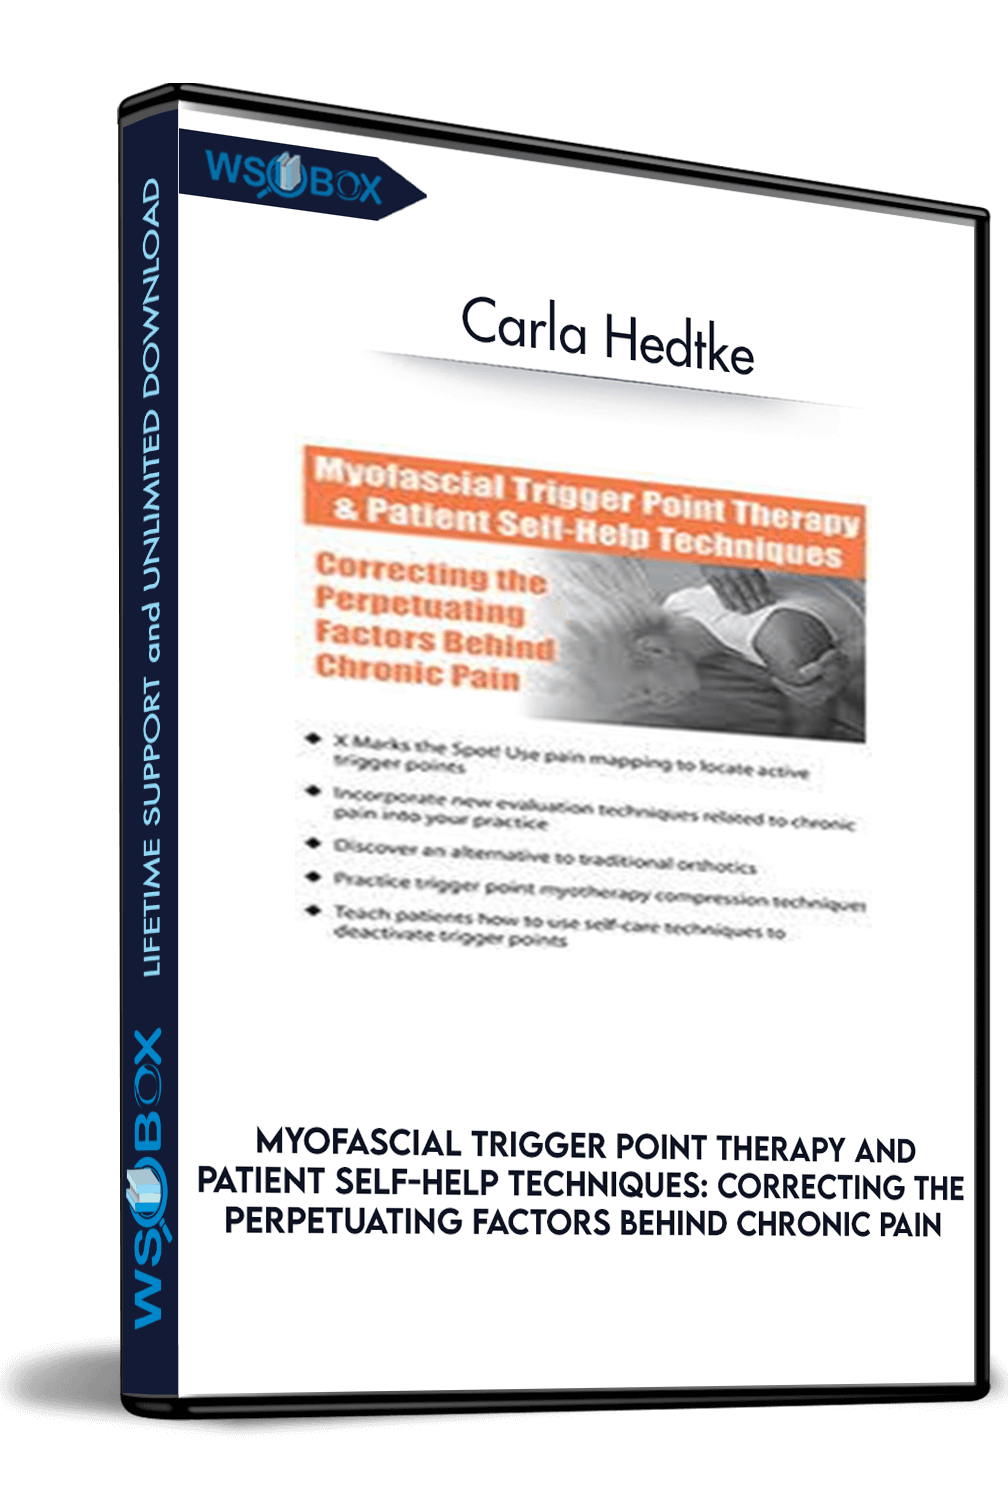 myofascial-trigger-point-therapy-and-patient-self-help-techniques-correcting-the-perpetuating-factors-behind-chronic-pain-carla-hedtke